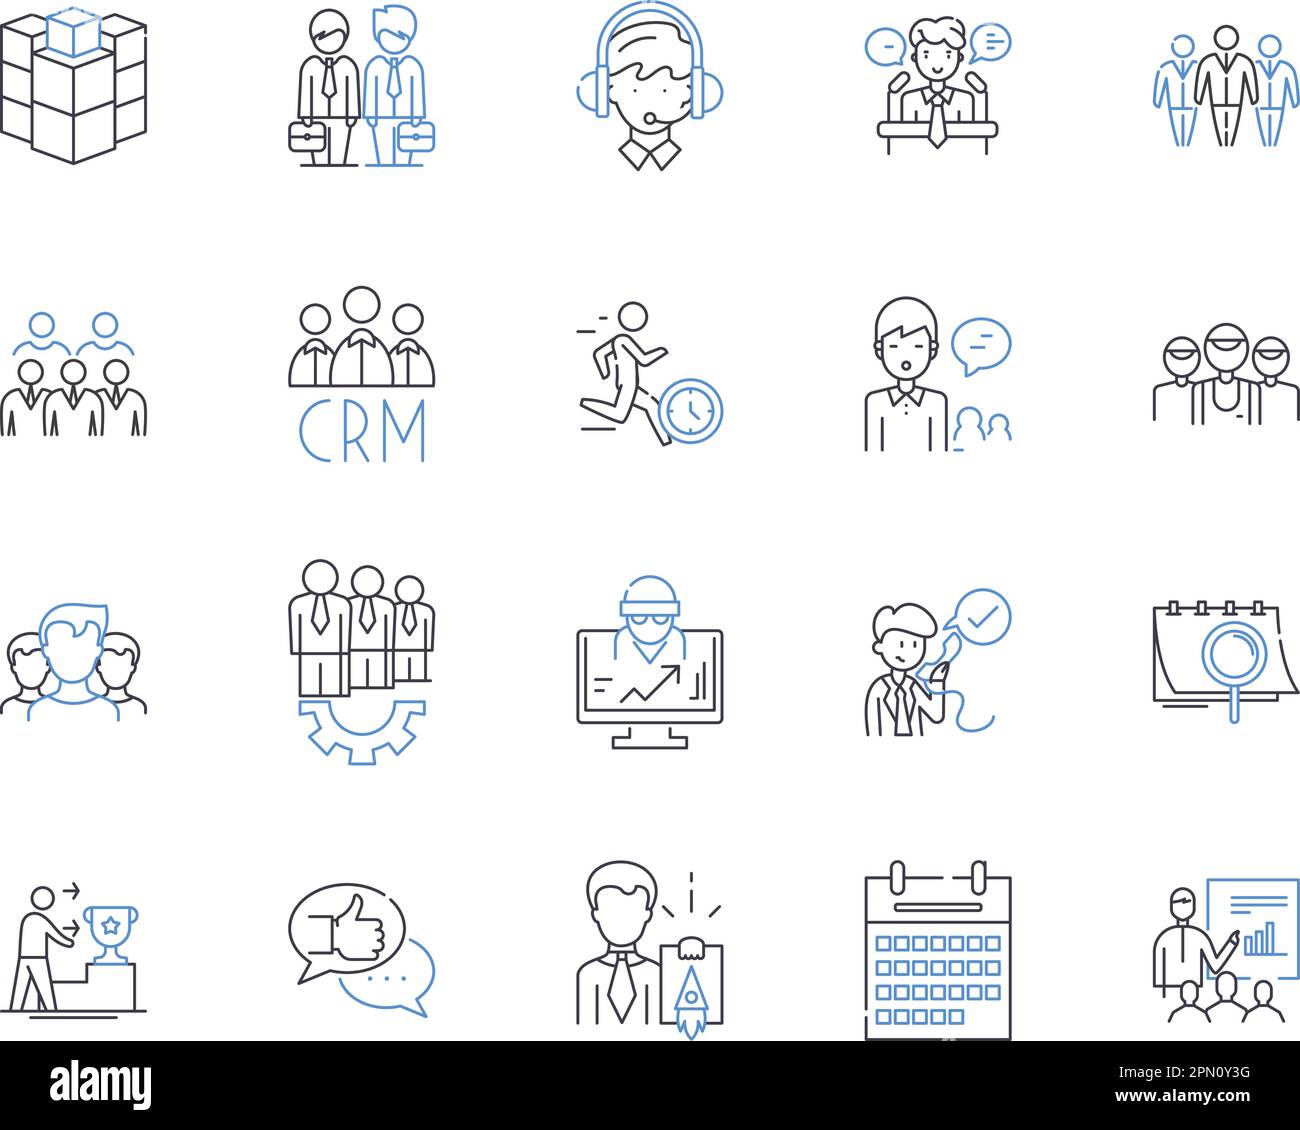 Customer service outline icons collection. customer service, care, assistance, help, support, aid, solutions vector and illustration concept set Stock Vector